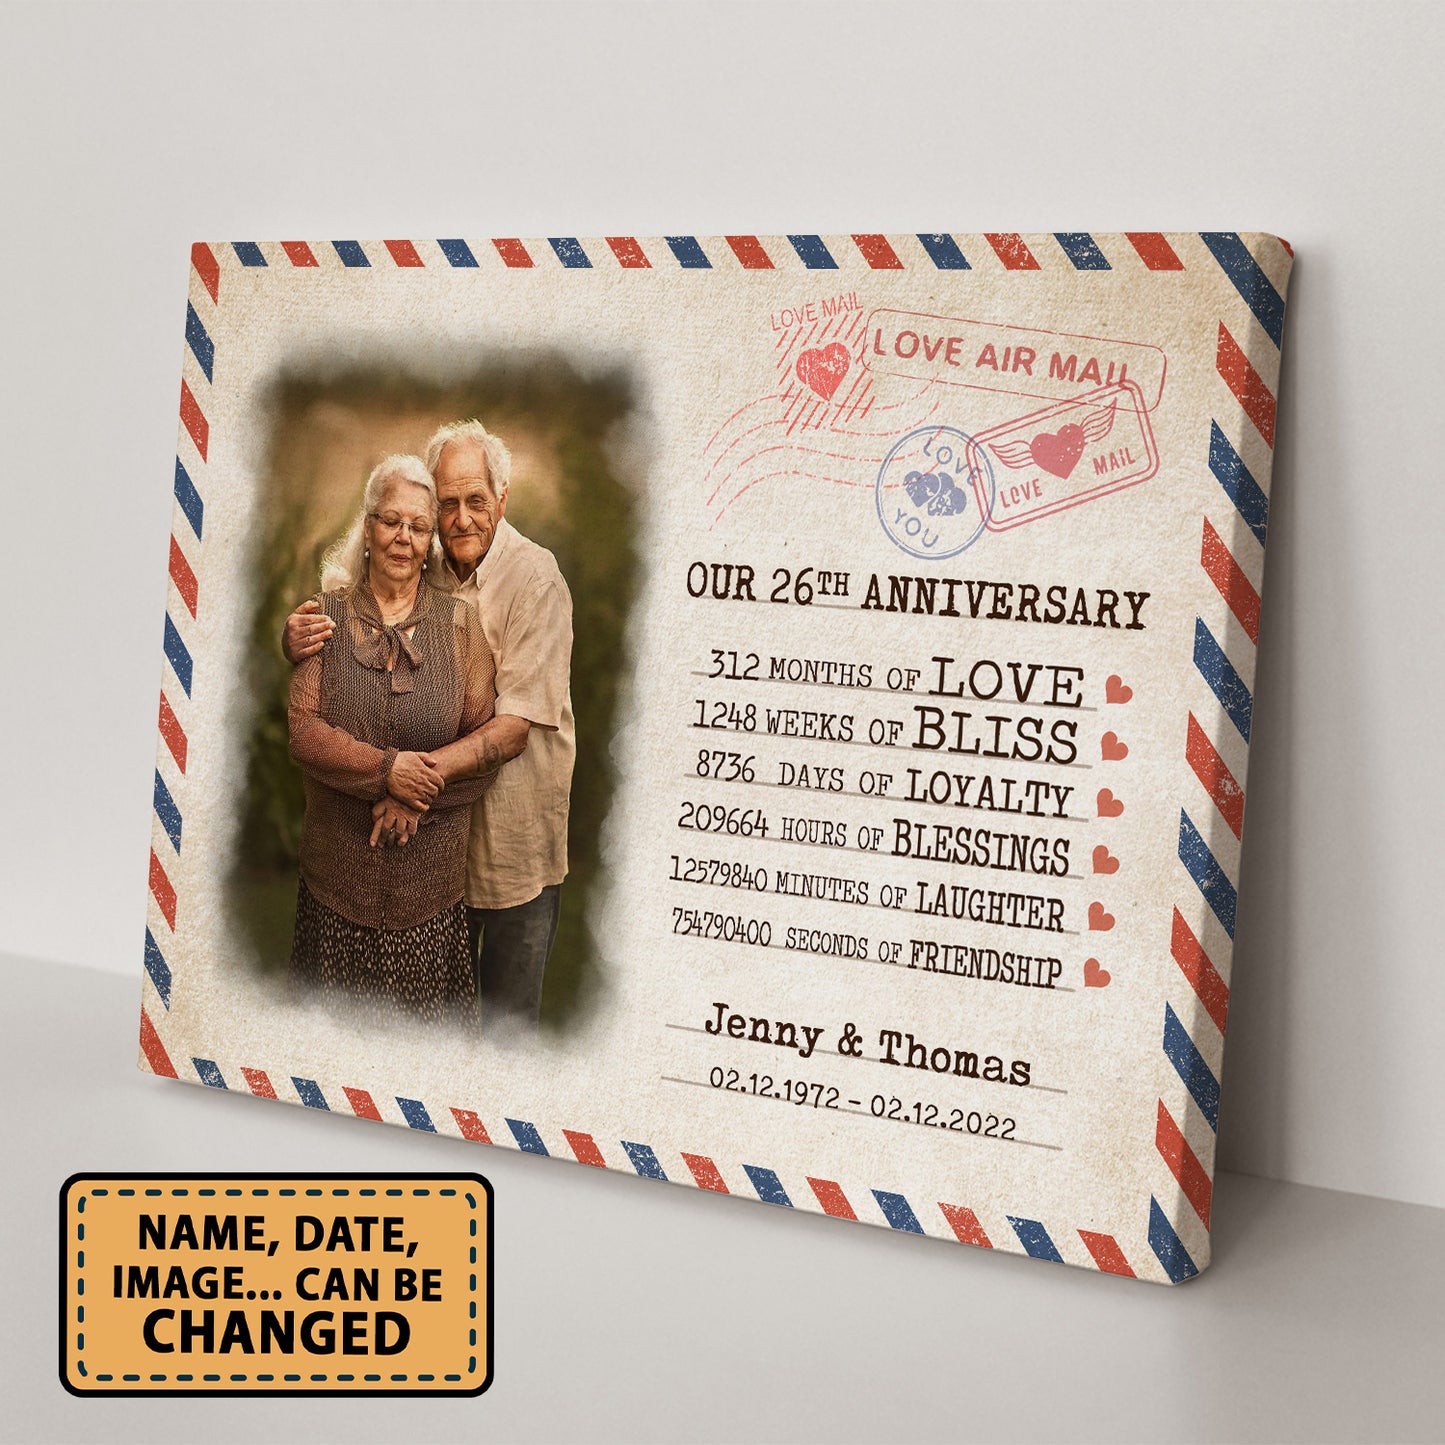 Our 26th Anniversary Letter Valentine Gift Personalized Canvas